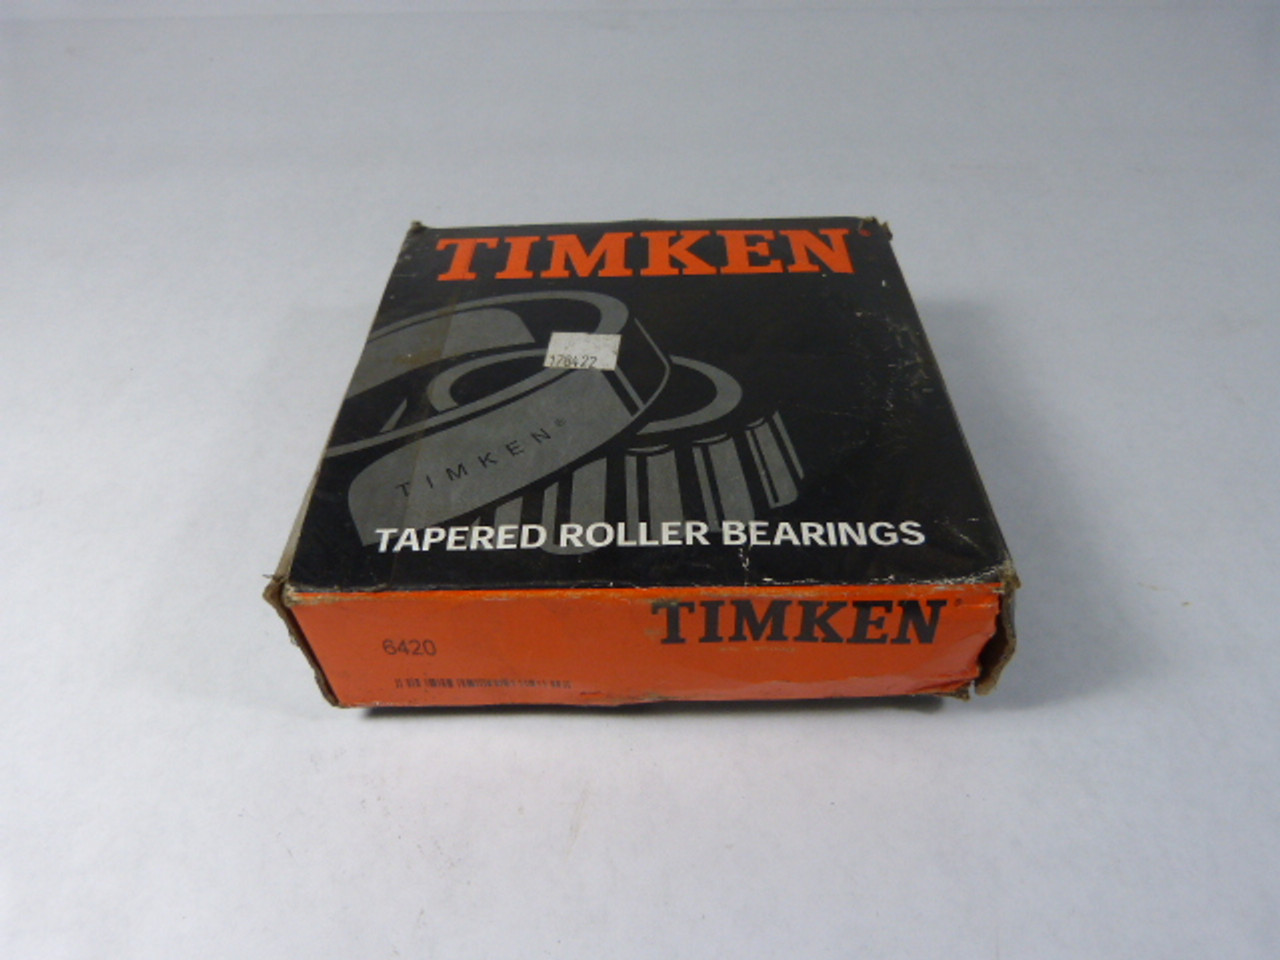 Timken 6420 Tapered Roller Bearing Outer Race Cup 5.875X1.75 Inch ! NEW !